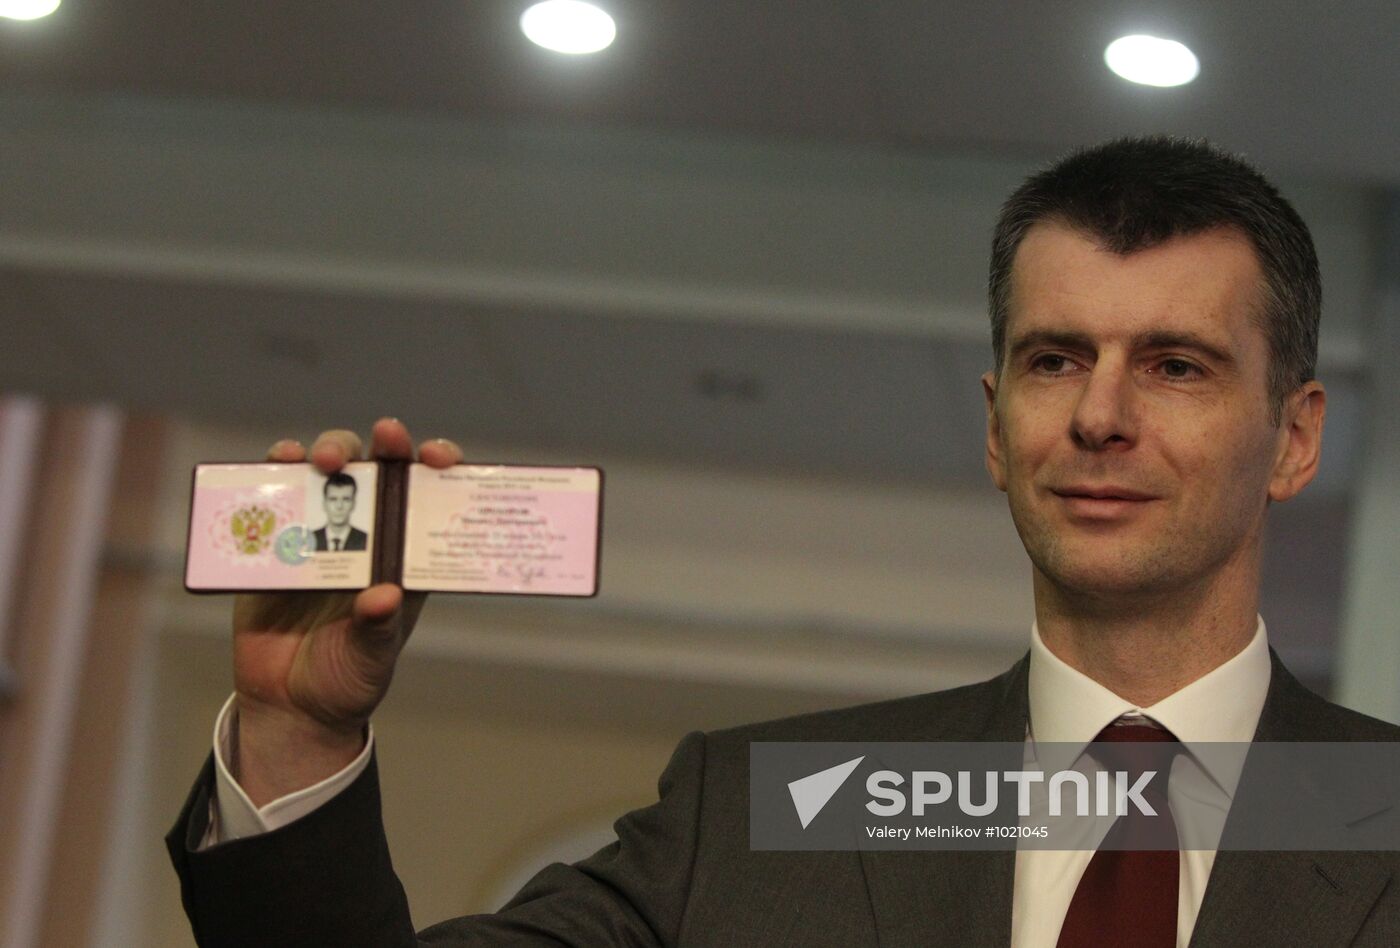 Mikhail Prokhorov registered as presidential candidate